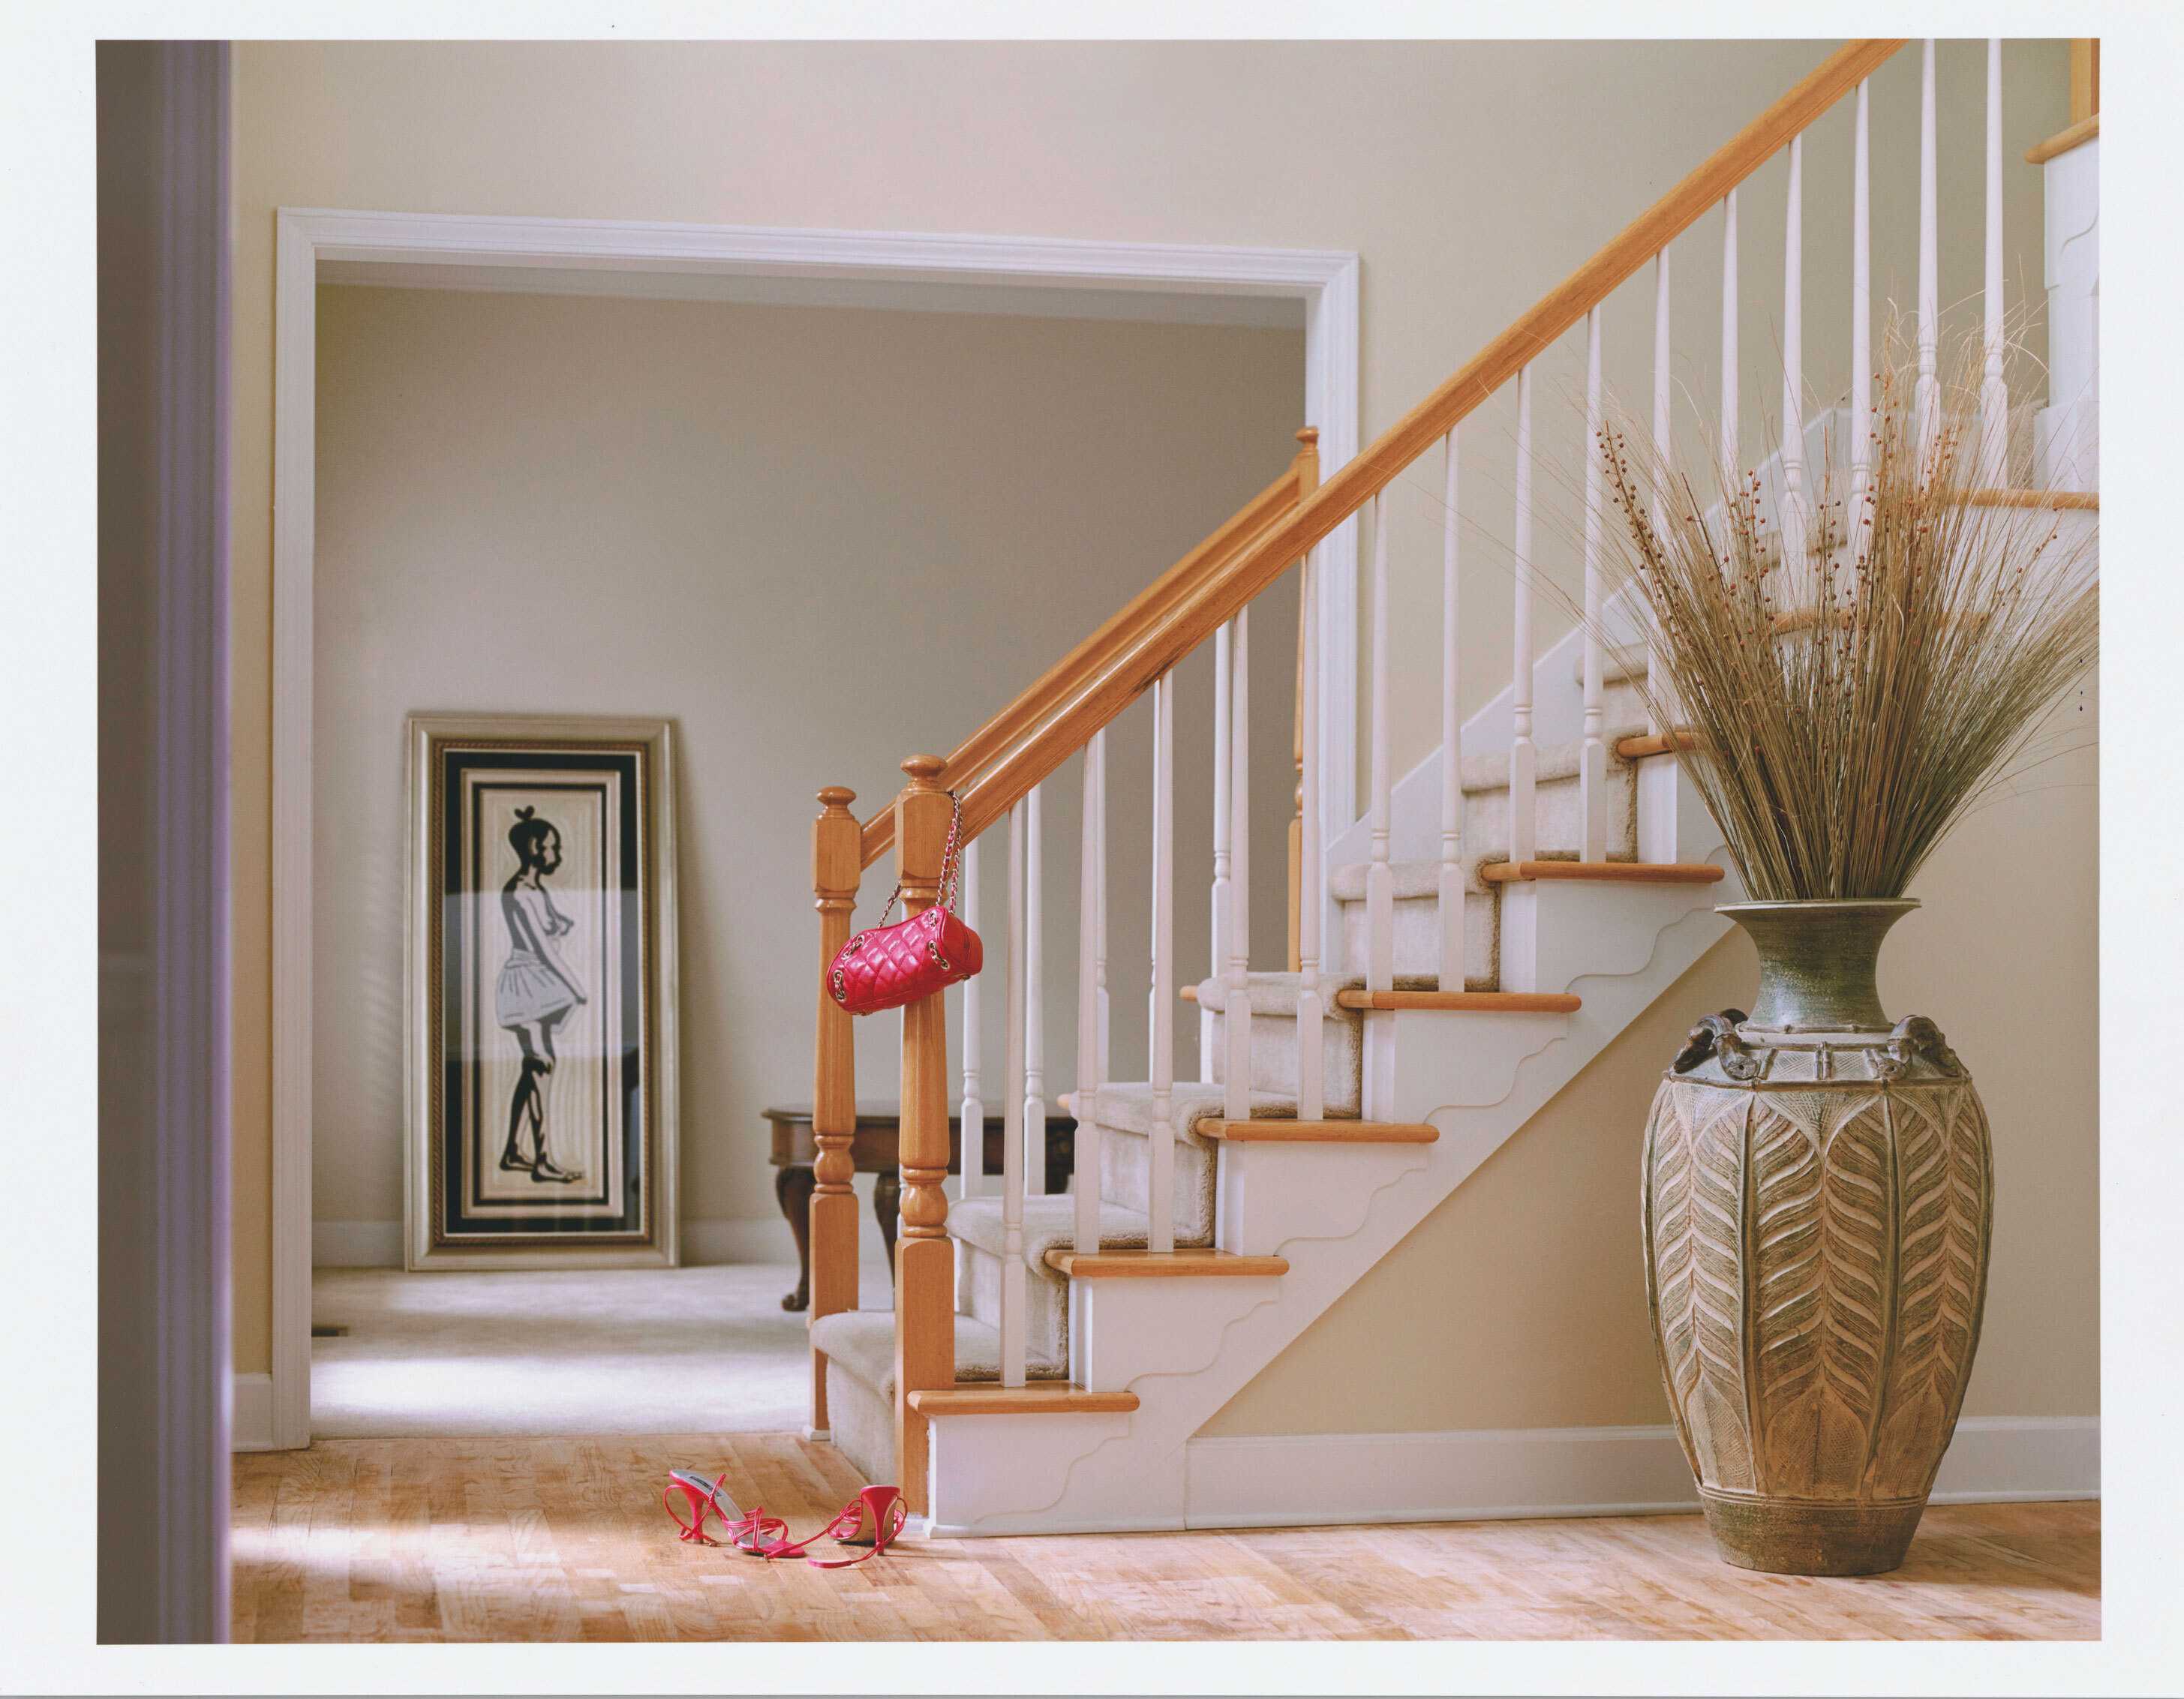 Color photograph showing the entryway to a home, showing a stairwell with a pink purse hanging from banister and a pair of hot pink high-heeled shoes at the ase.  There is a large vase with tall grasses next to the stairwell and a large framed picture of a woman, leaning against the wall in the distance..